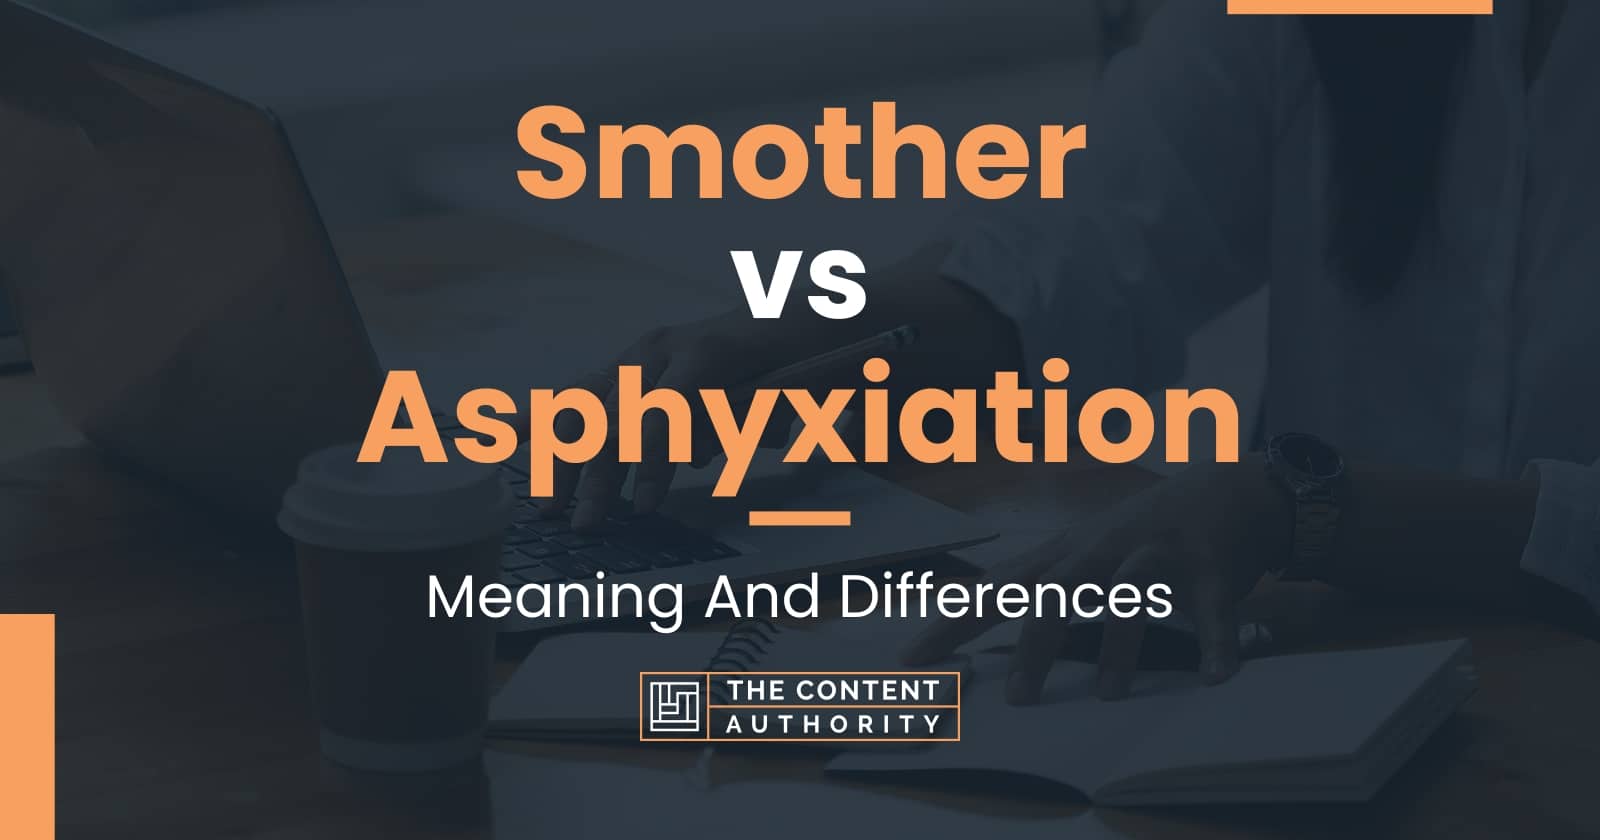 Smother vs Asphyxiation: Meaning And Differences